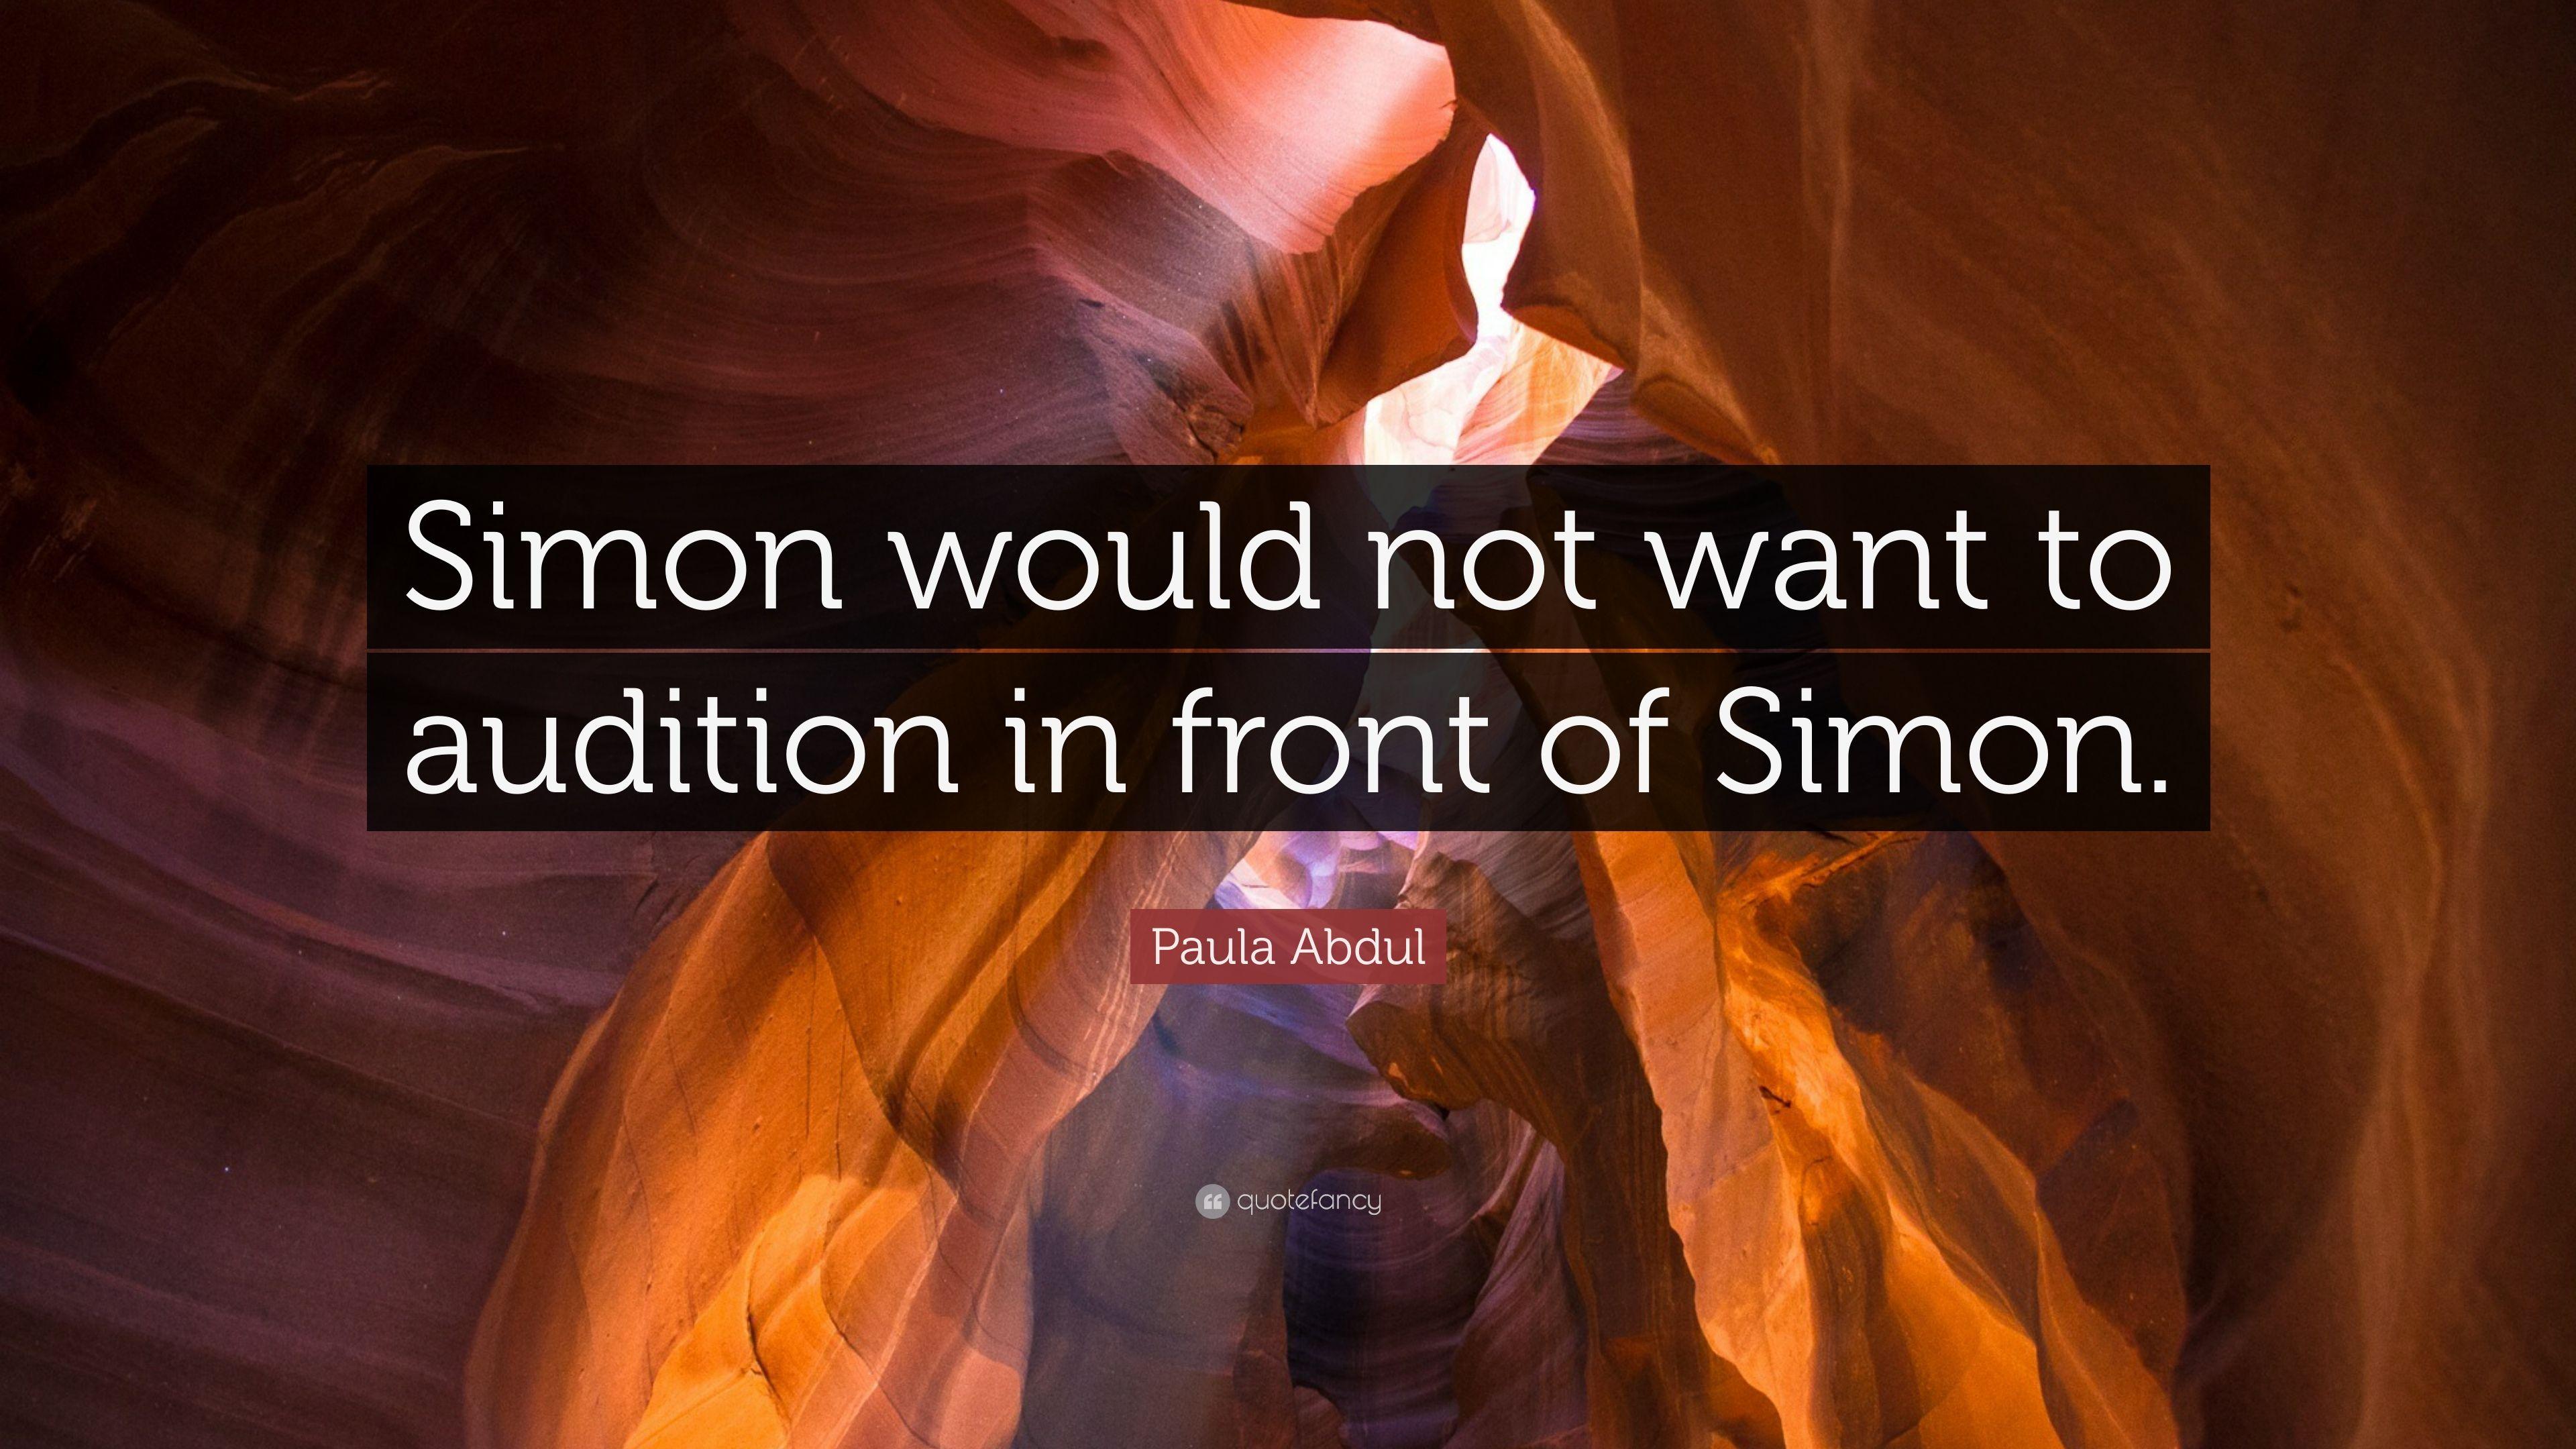 Paula Abdul Quote: “Simon would not want to audition in front